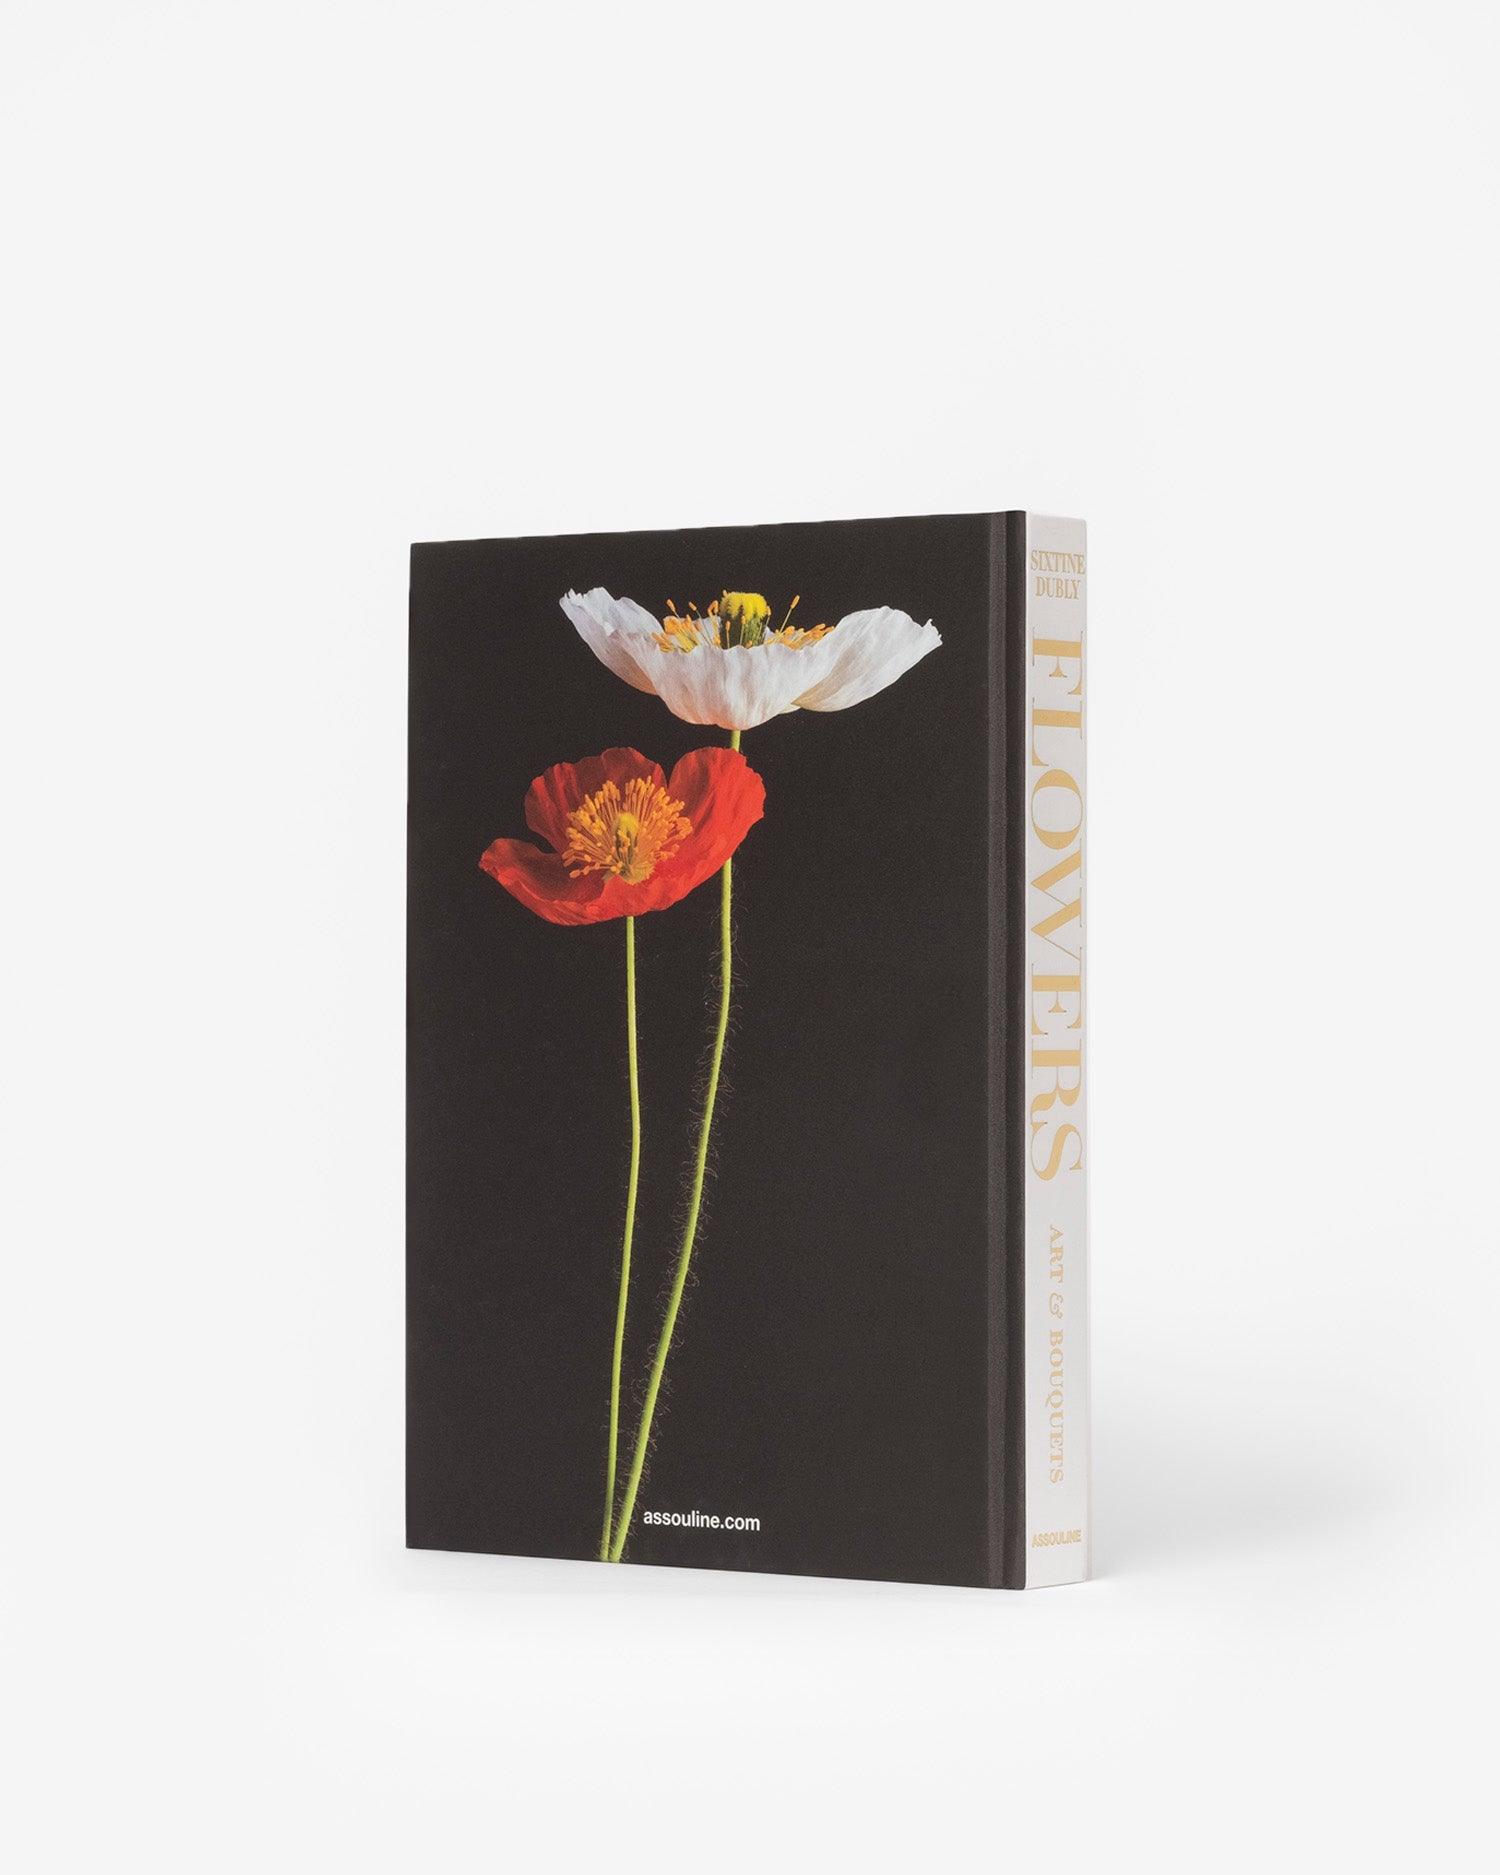 Flowers: Art & Bouquets book by Sixtine Dubly | ASSOULINE